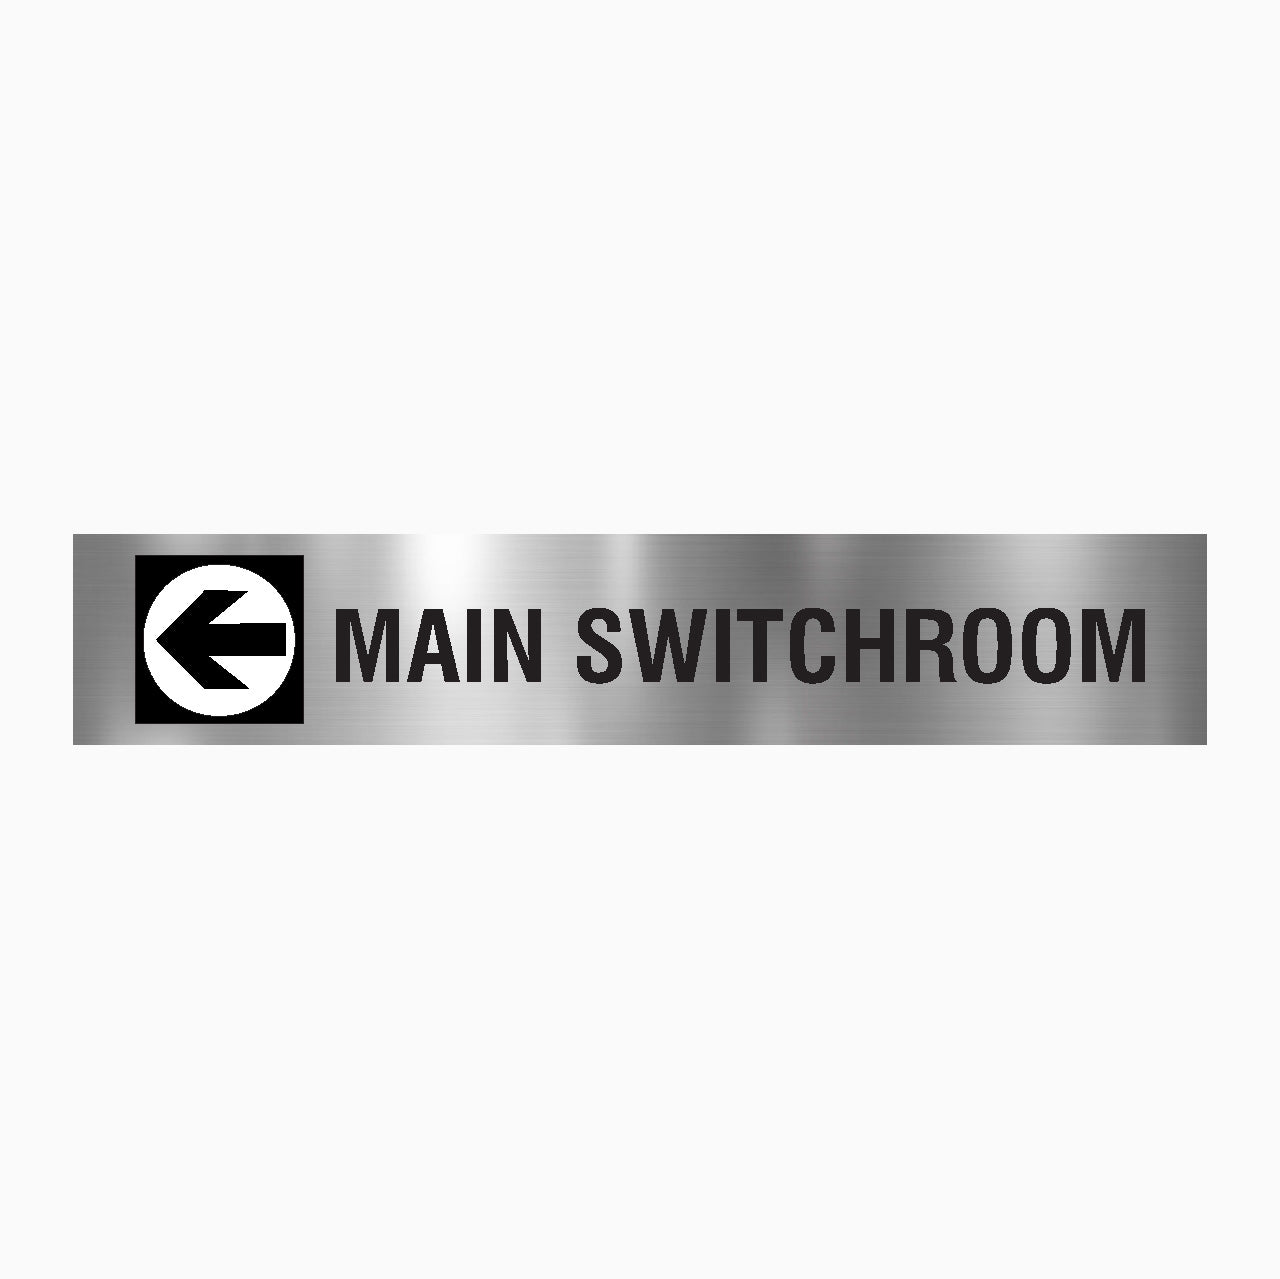 MAIN SWITCH ROOM SIGN - LEFT ARROW SIGN